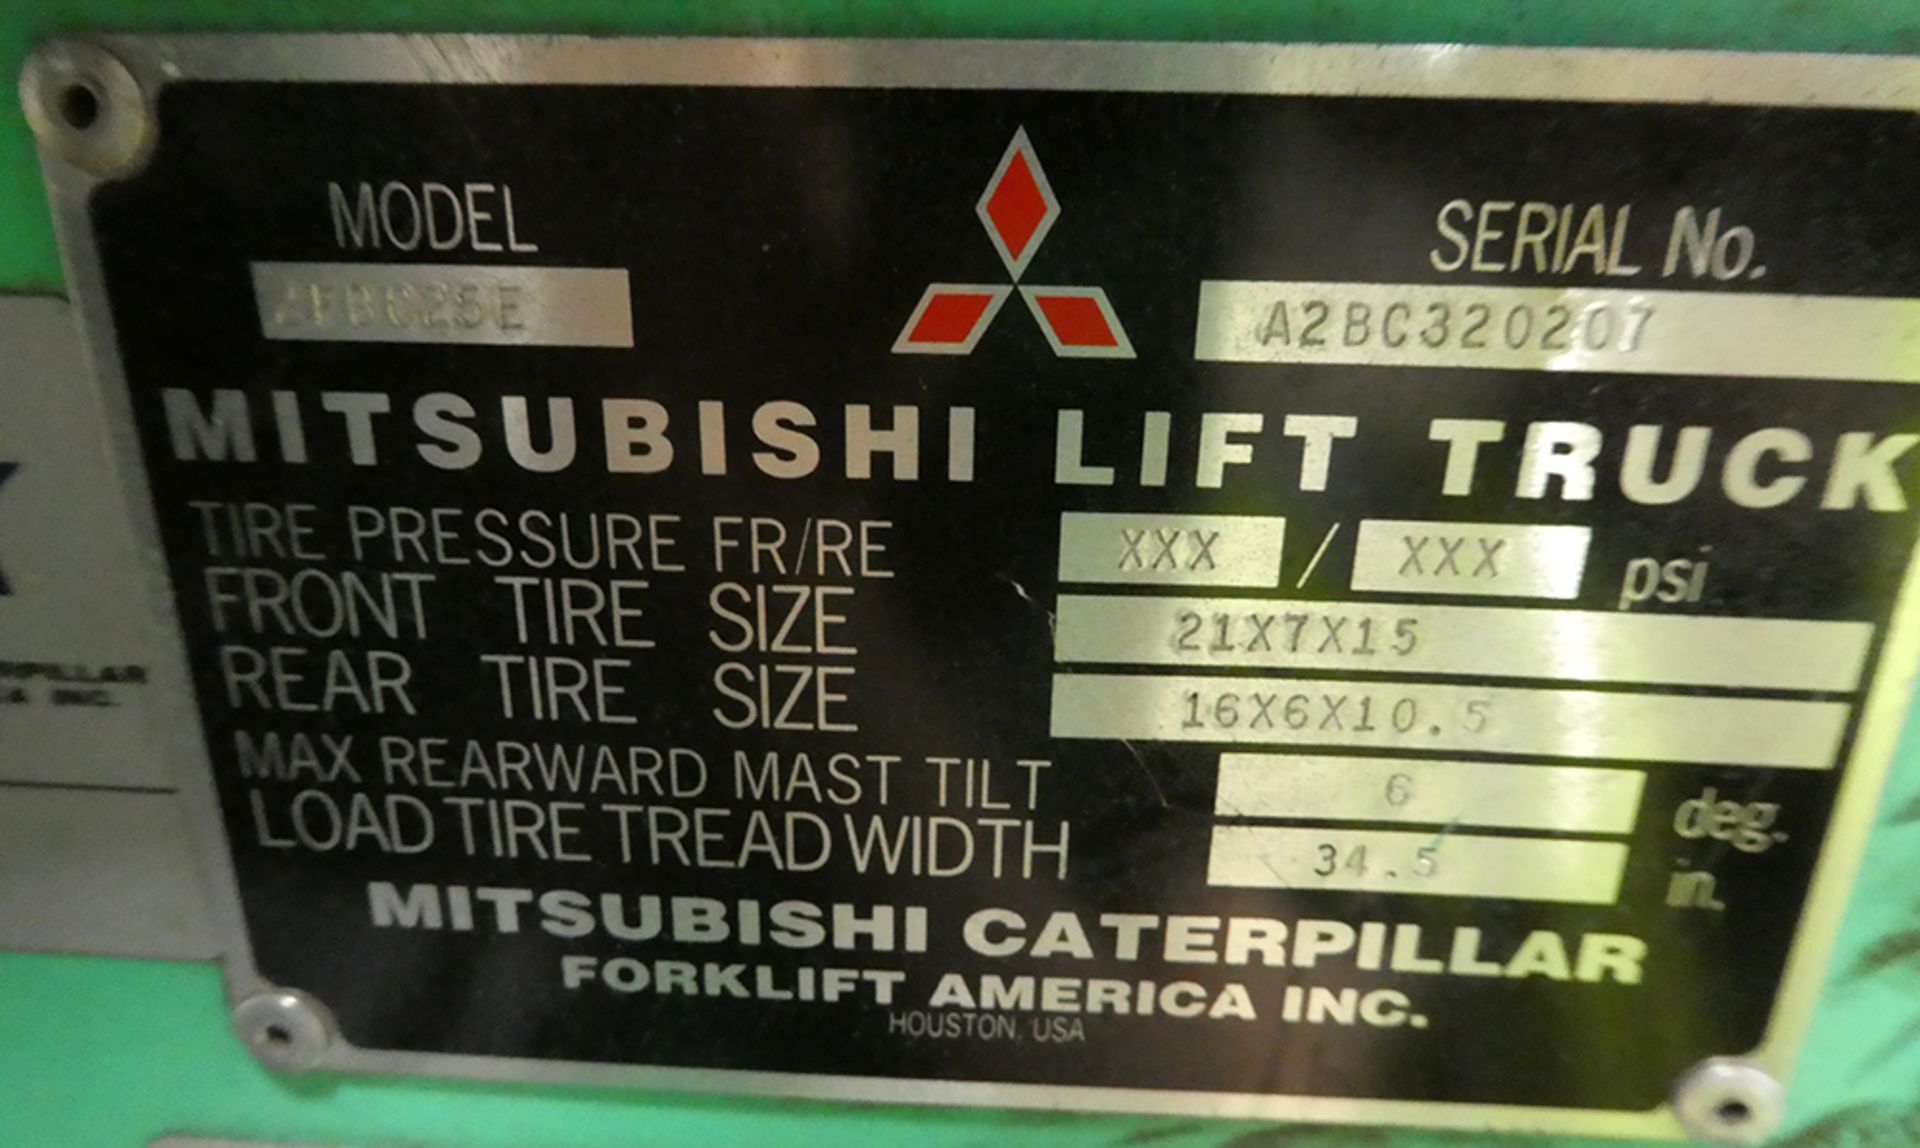 1999 Mitsubishi 21FBC25E 5,000 lb Electric Forklift With Turn-A-Fork - Image 12 of 13